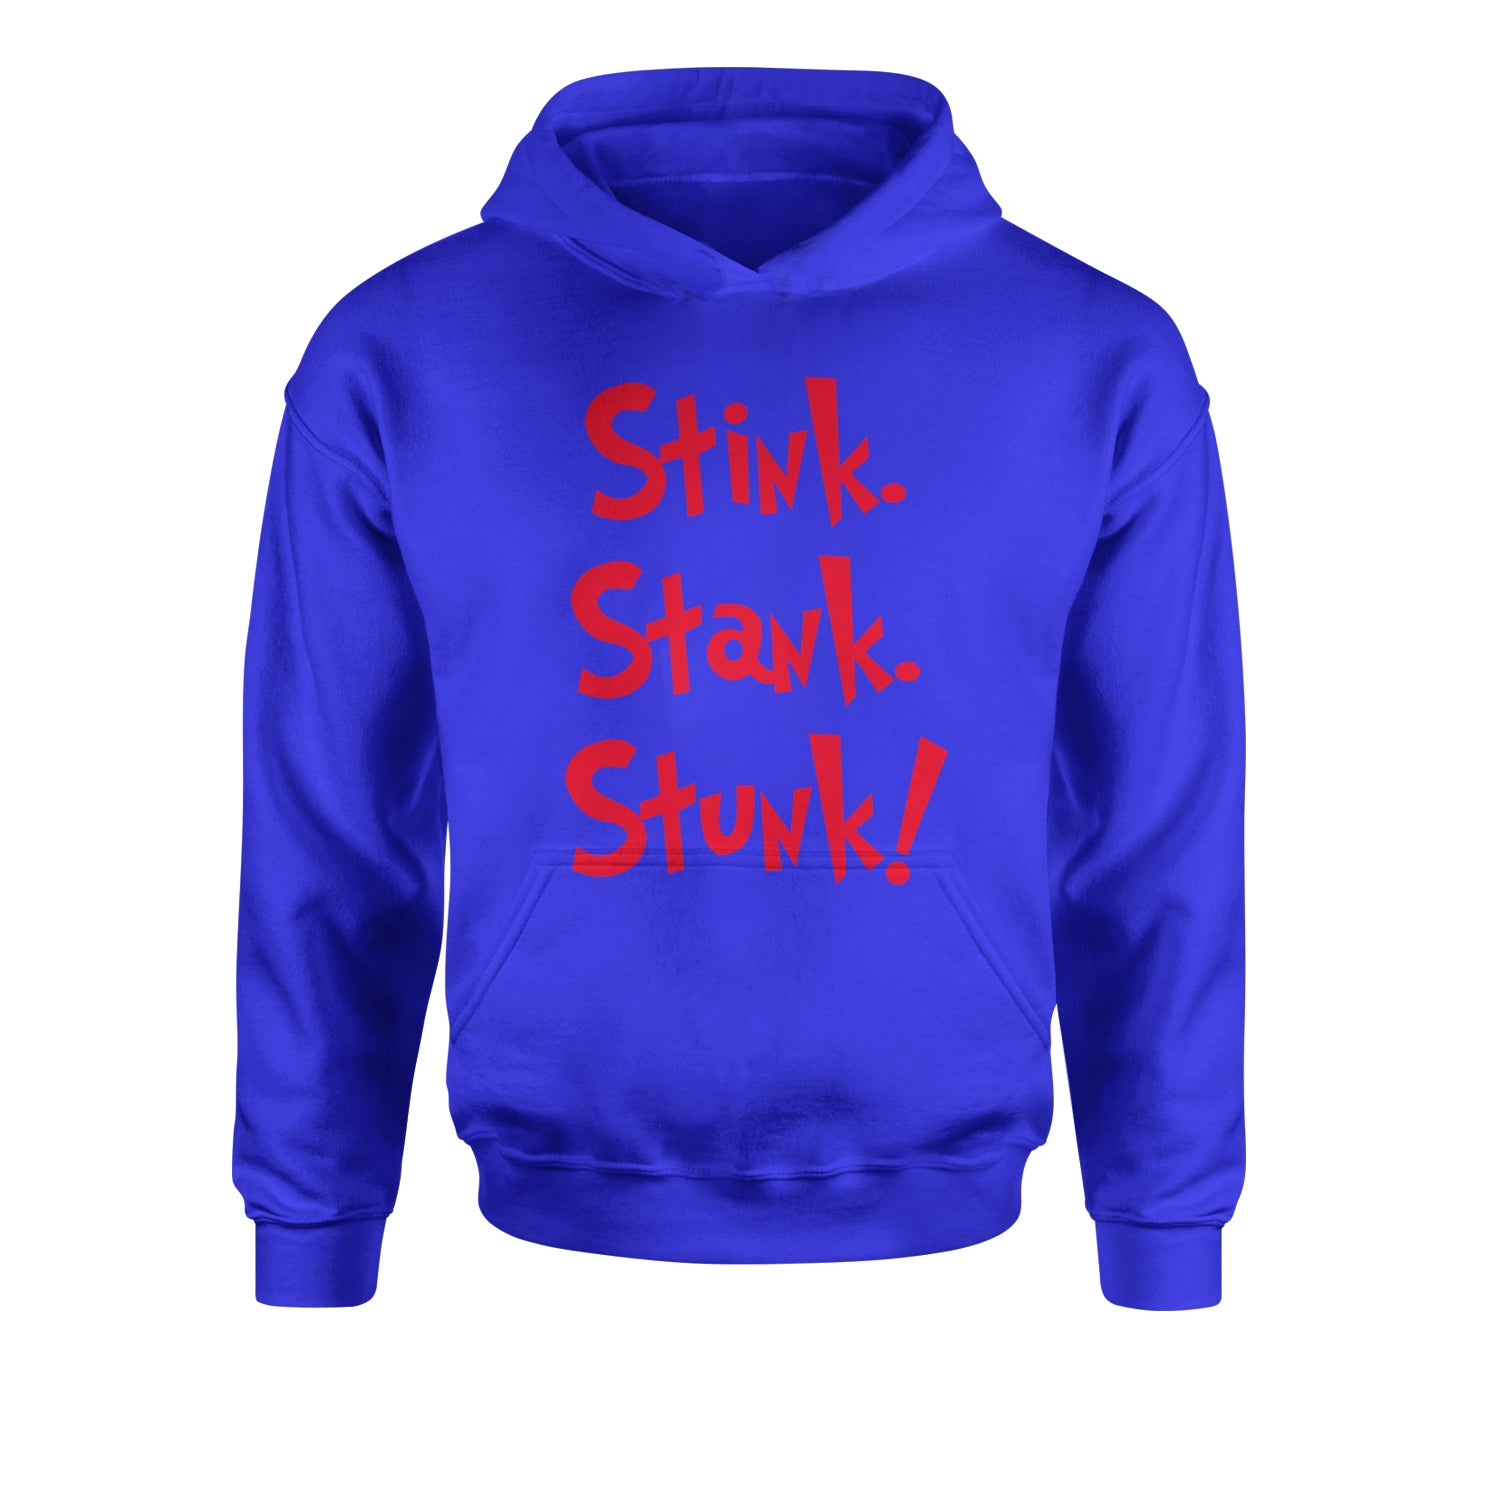 Stink Stank Stunk Grinch Youth-Sized Hoodie christmas, holiday, sweater, ugly, xmas by Expression Tees